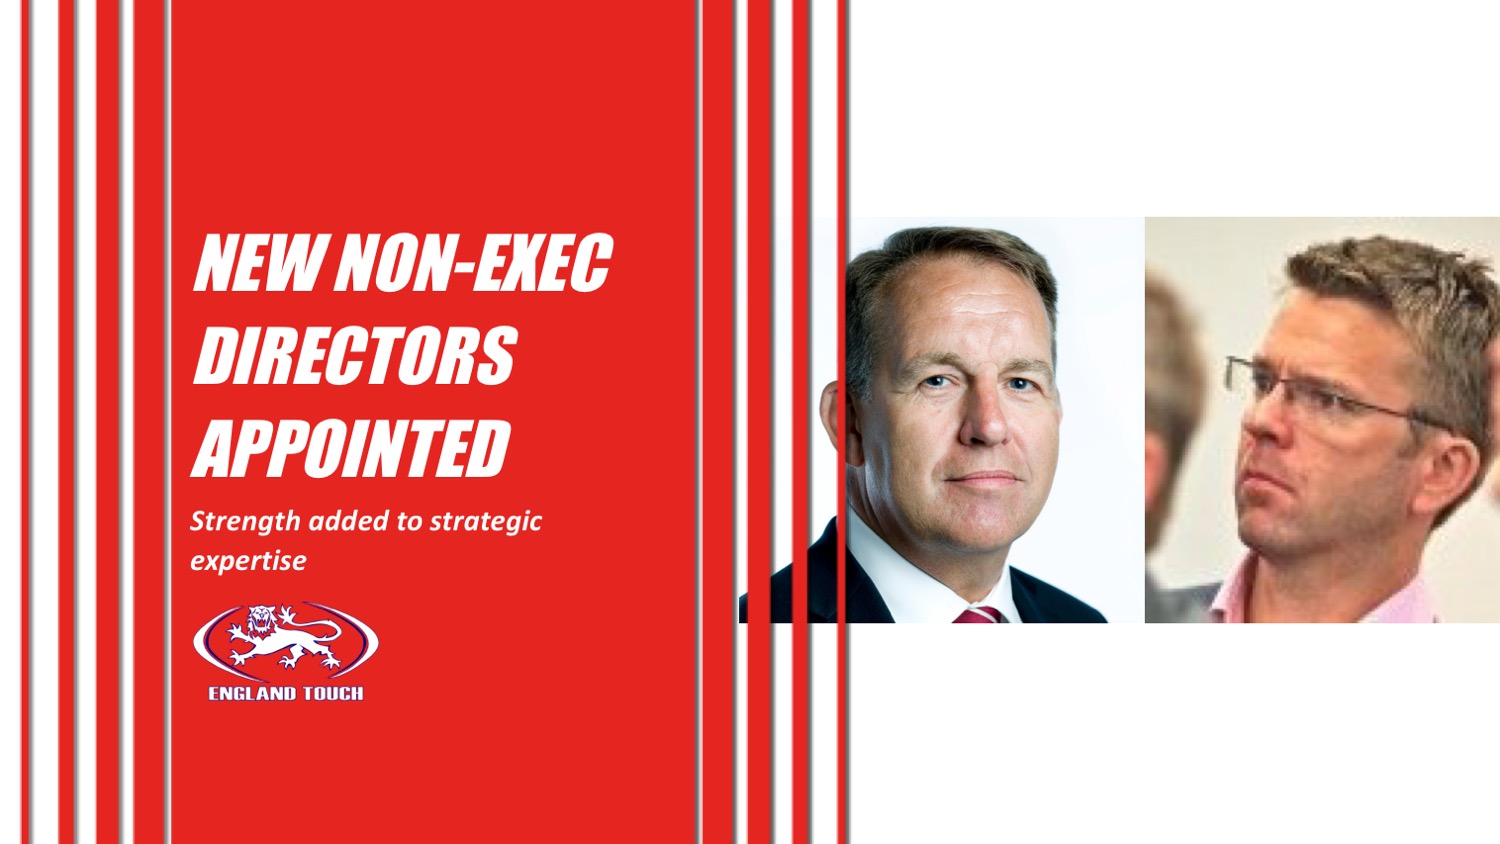 England Touch adds more experience to Board of Directors